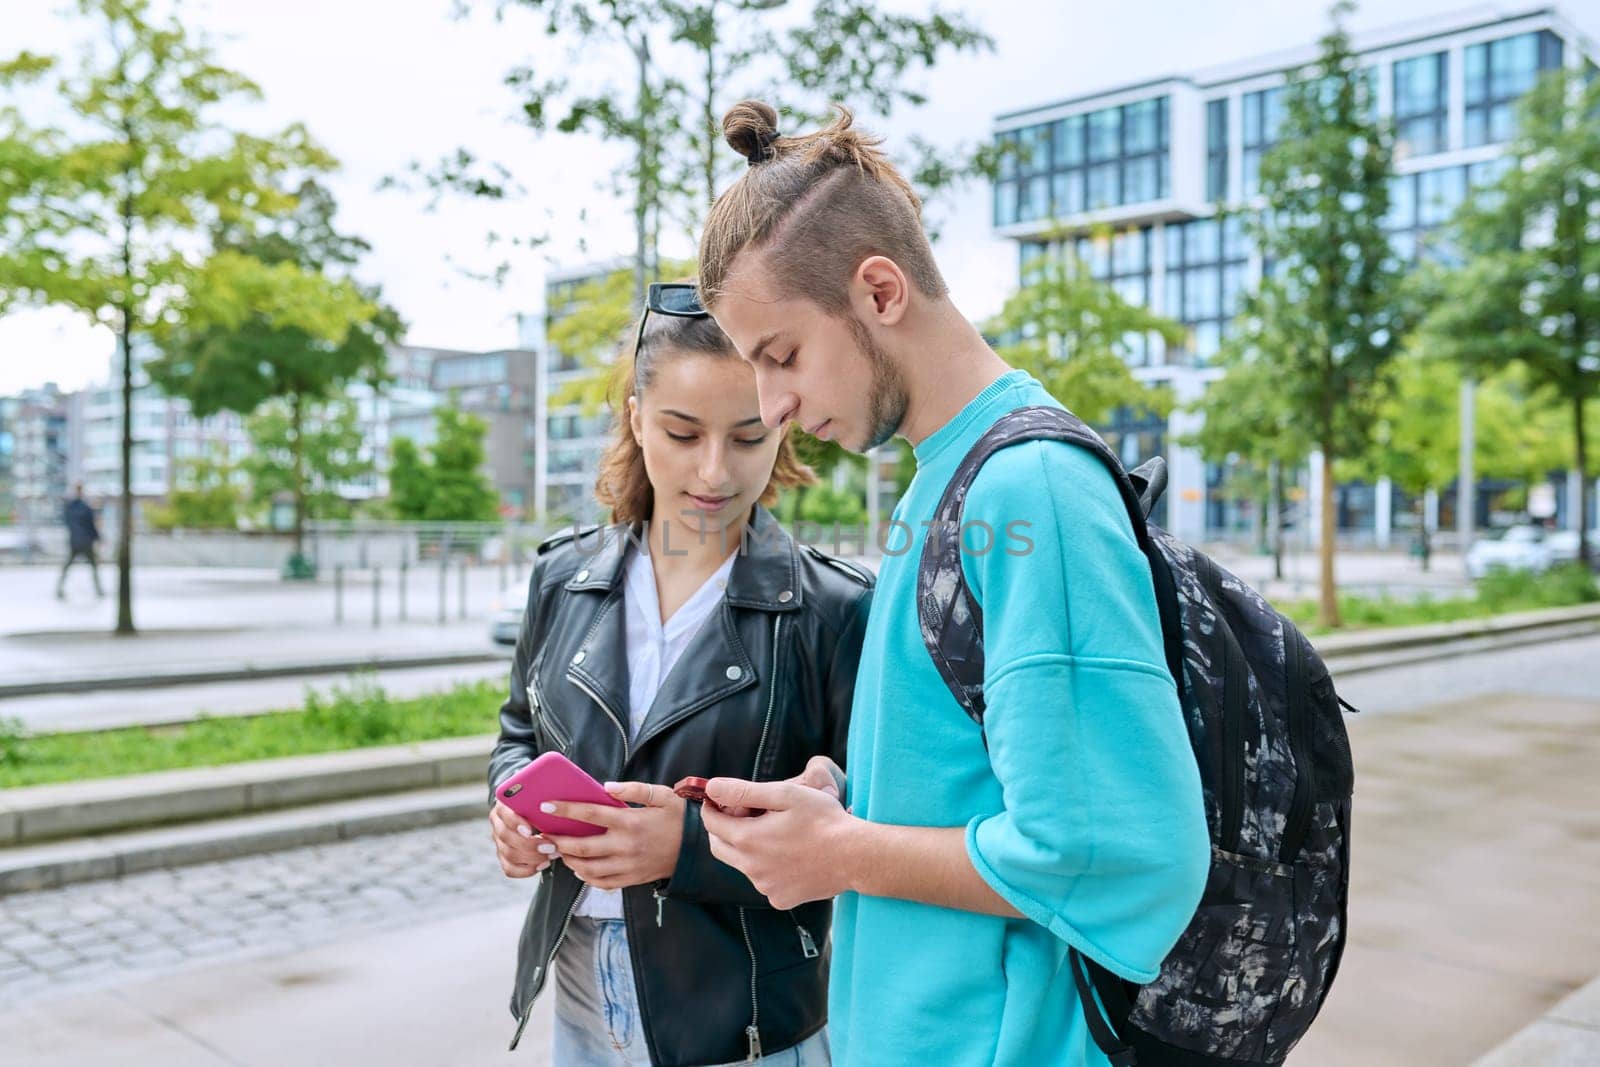 Teenage friends guy and girl standing together using smartphones by VH-studio